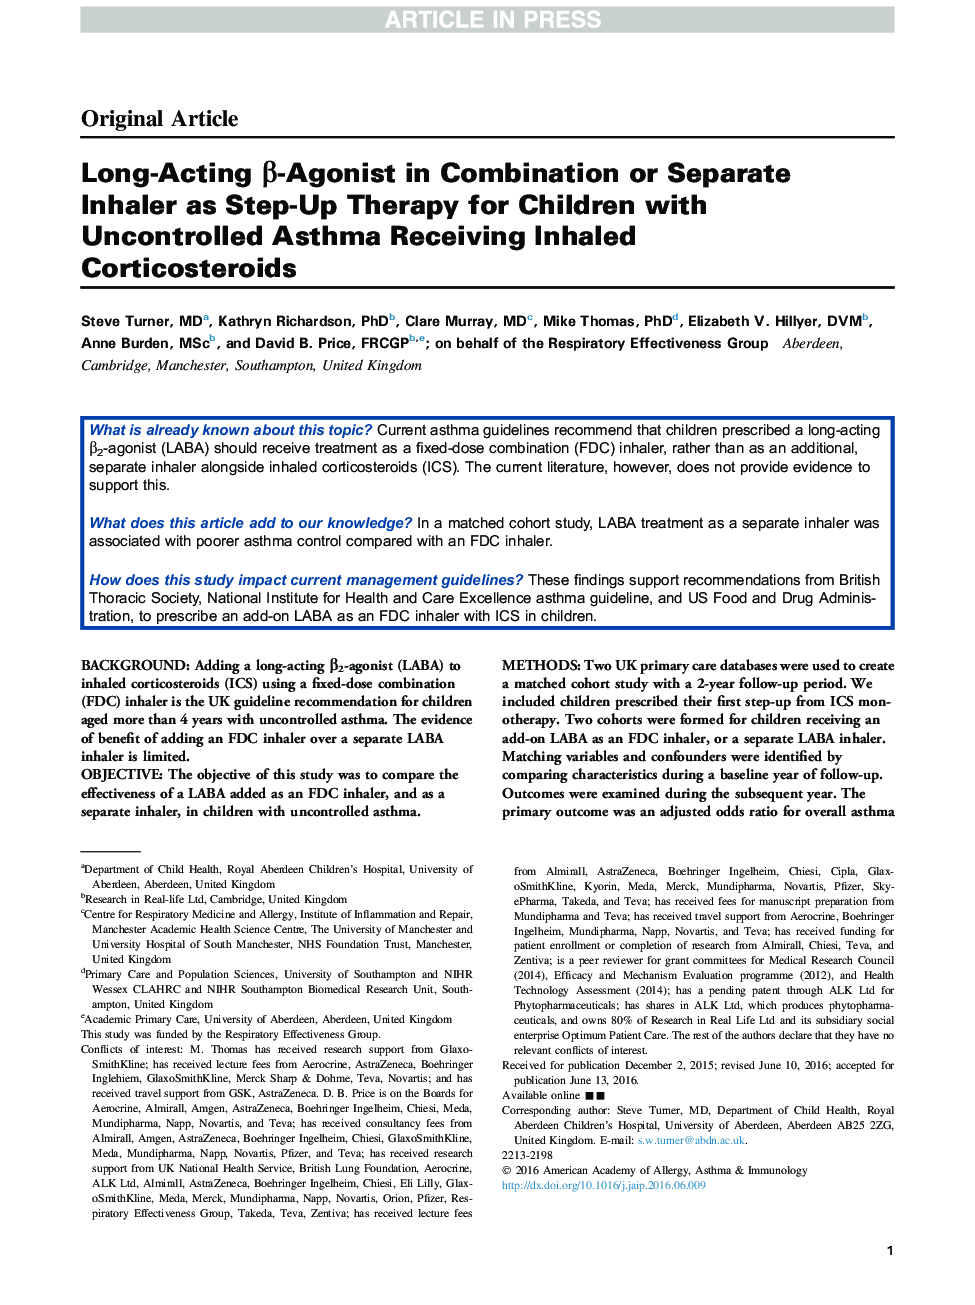 Long-Acting Î²-Agonist in Combination or Separate Inhaler as Step-Up Therapy for Children with Uncontrolled Asthma Receiving Inhaled Corticosteroids